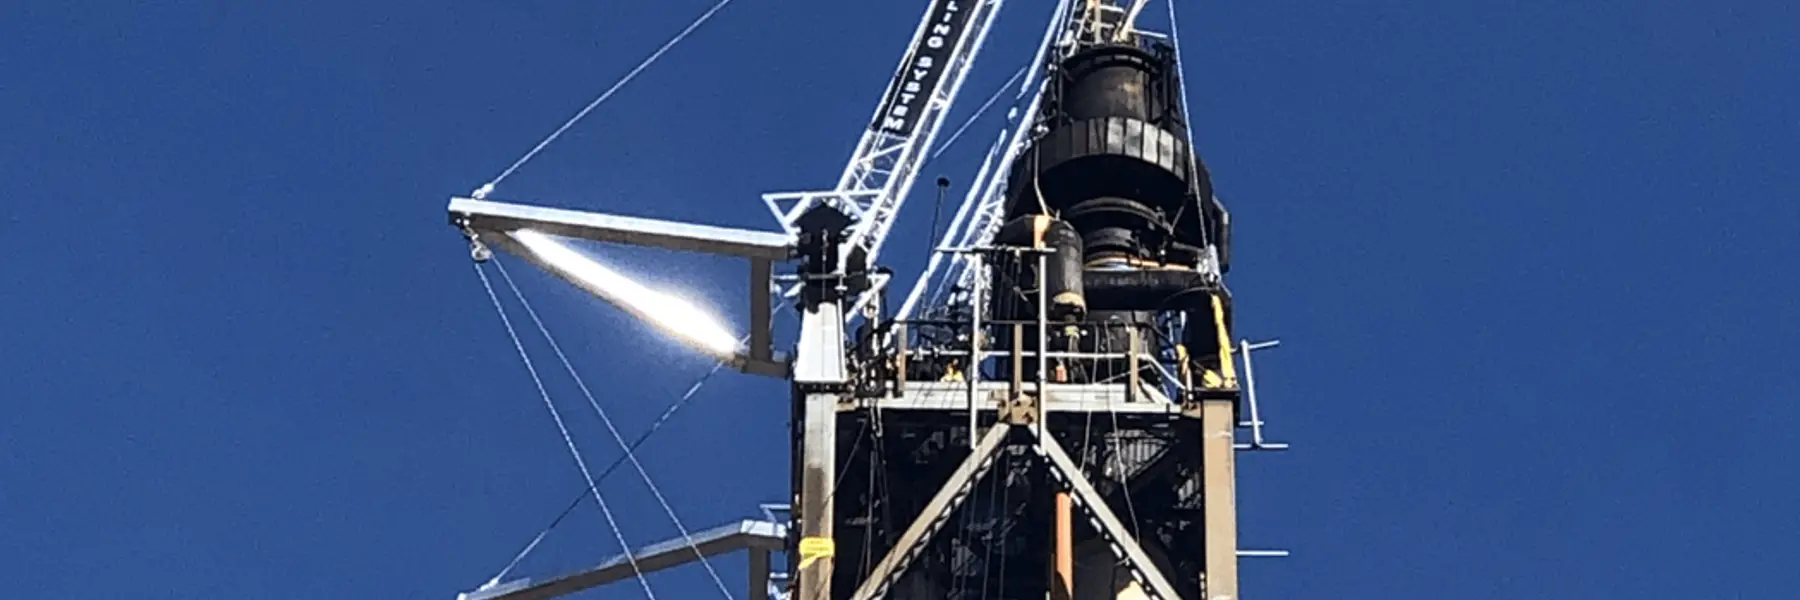 Beerenberg has carried out a torch change at INEOS Rafsnes' facility in Porsgrunn. Photo: Beerenberg.